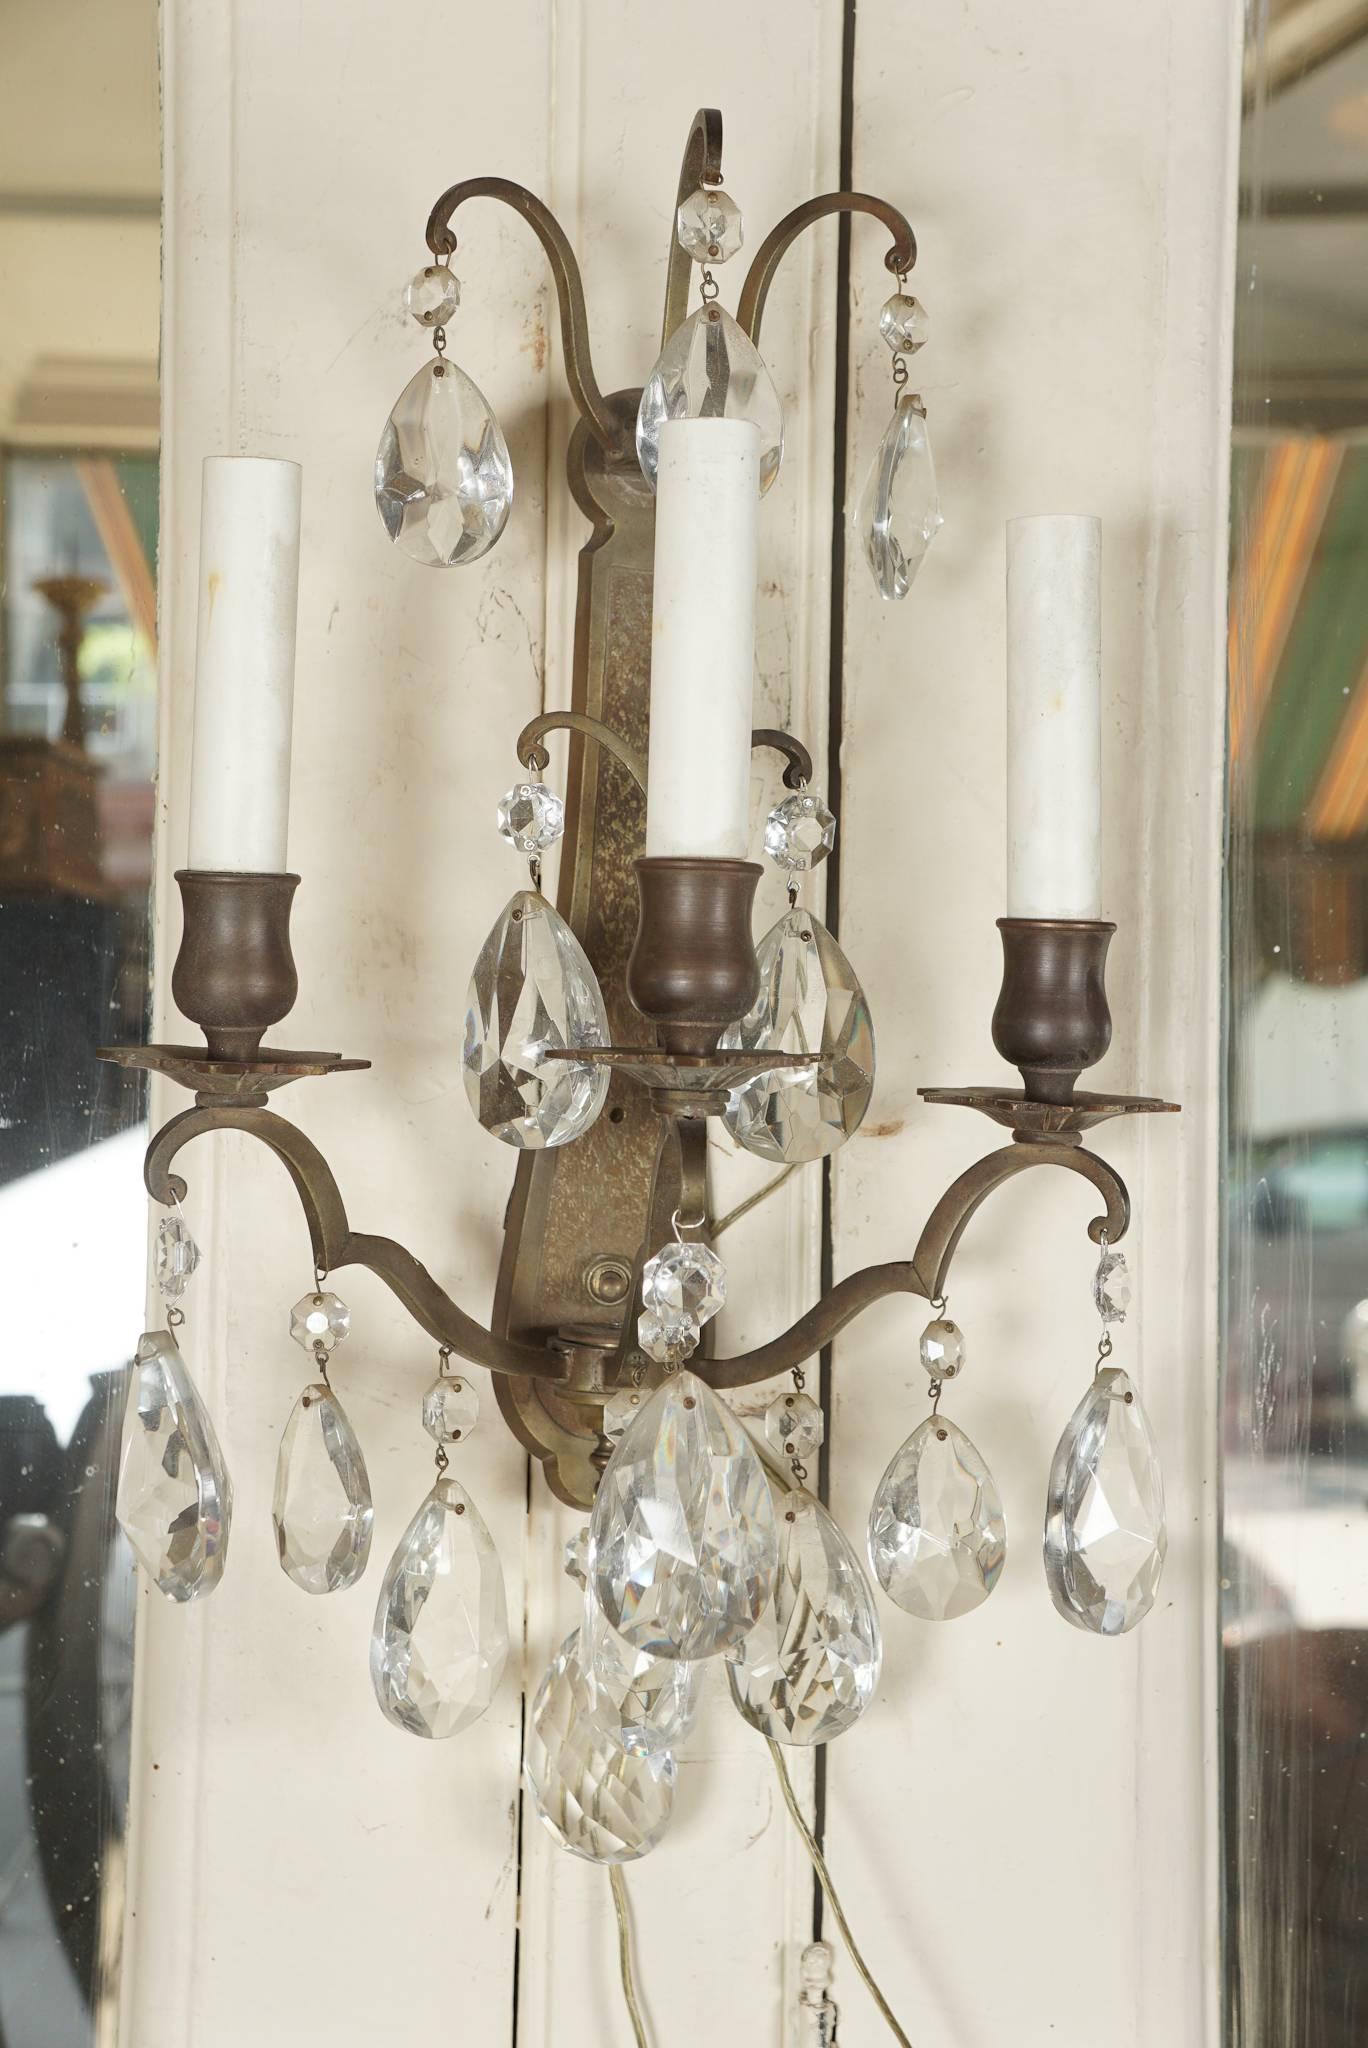 This pair of three-light scones made of cast bronze with an old world darkened patina were made in France and have been just rewired with American sockets and wiring. The pair made in the 1950s have large nicely cut crystal prisms in three different